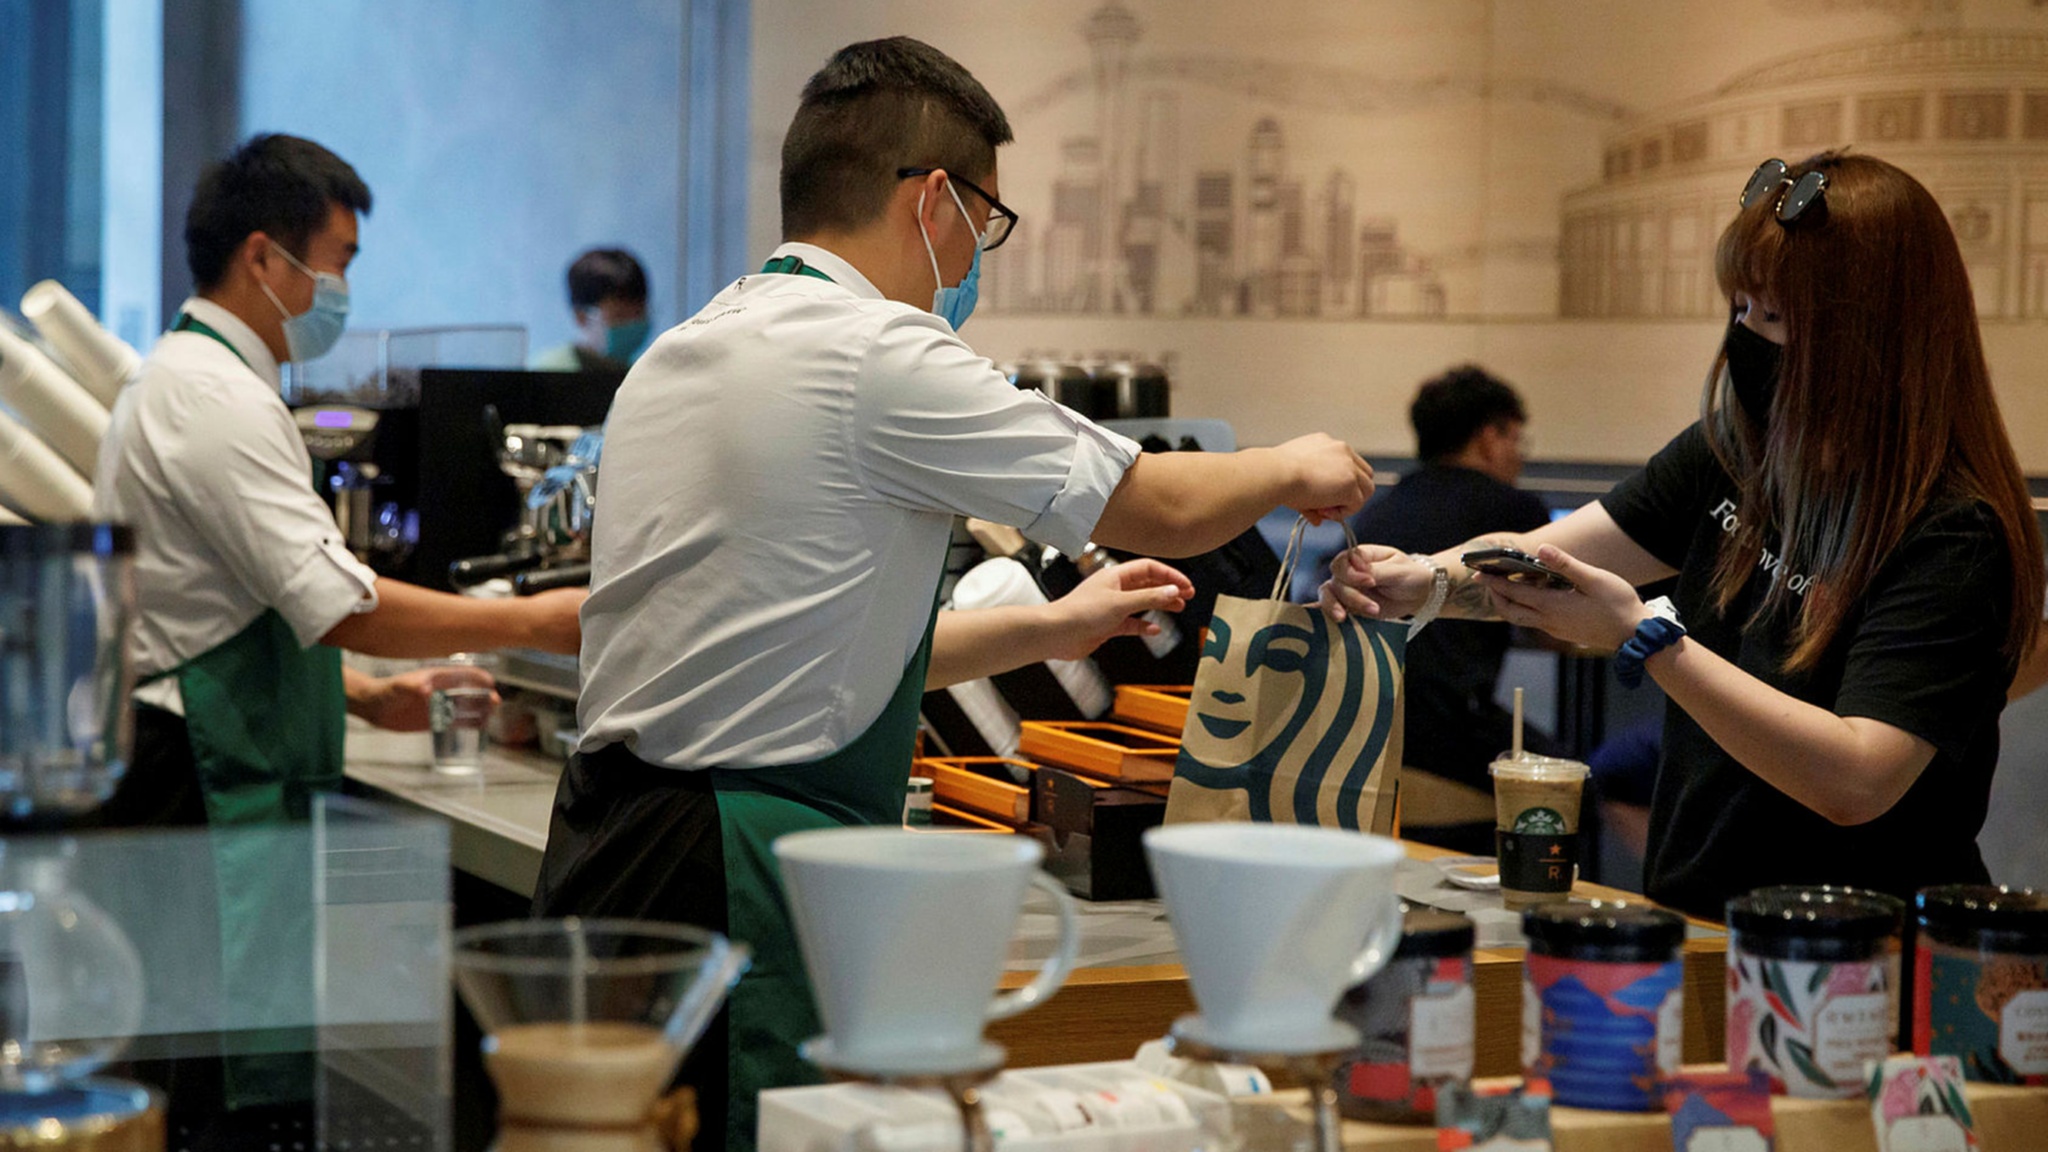 Does Starbucks Hire At 14, 15, 16 & 17 Years Old? (Full Guide)